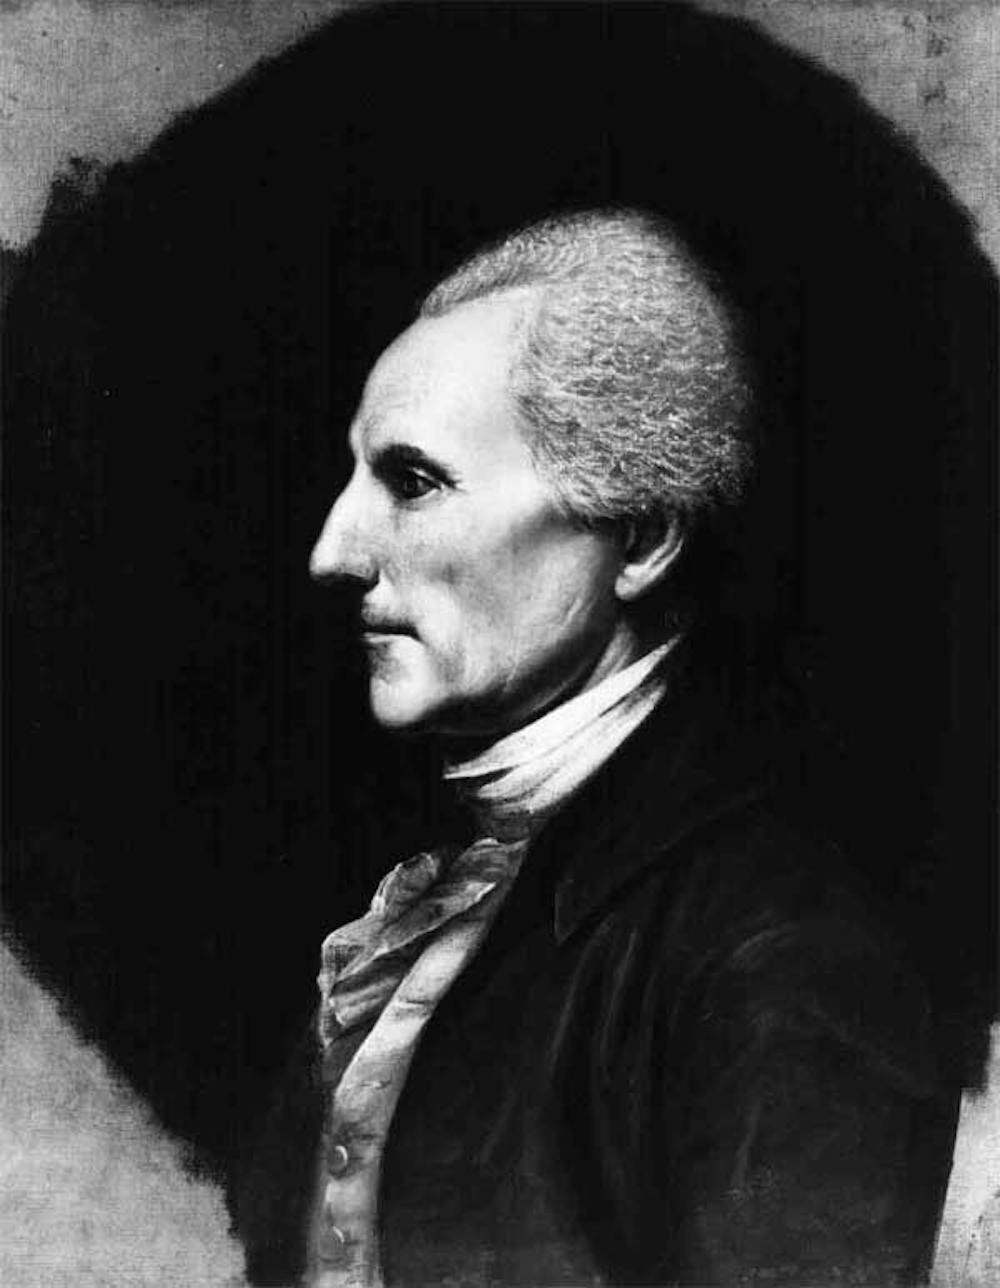 Courtesy of http://memory.loc.gov/ammem/collections/continental/images/photo15.jpg. Richard Henry Lee: the real author of the Declaration of Independence?